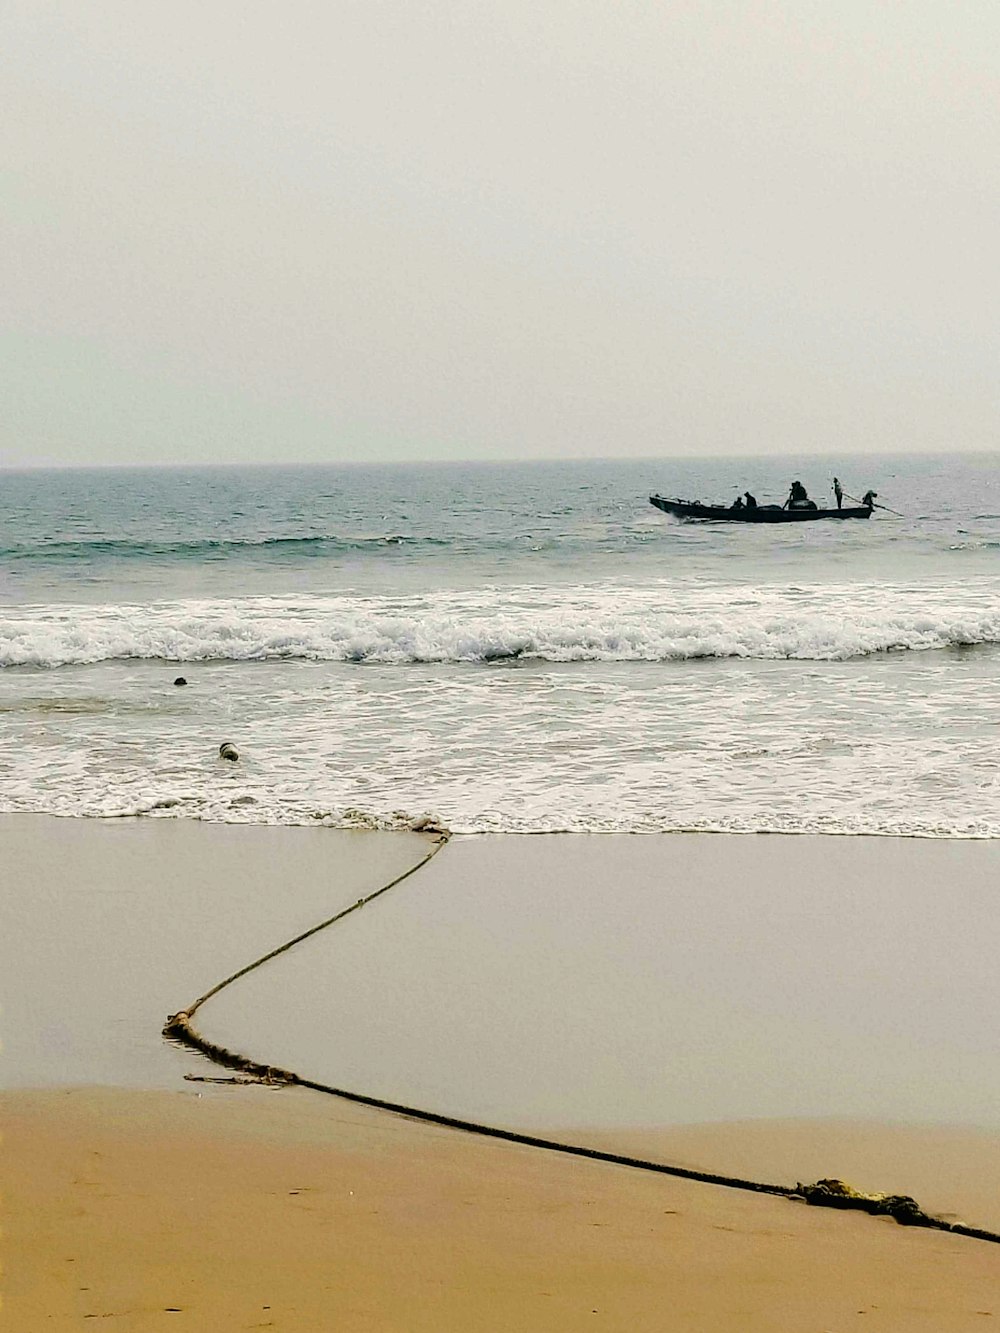 a boat in the ocean with a rope in the foreground